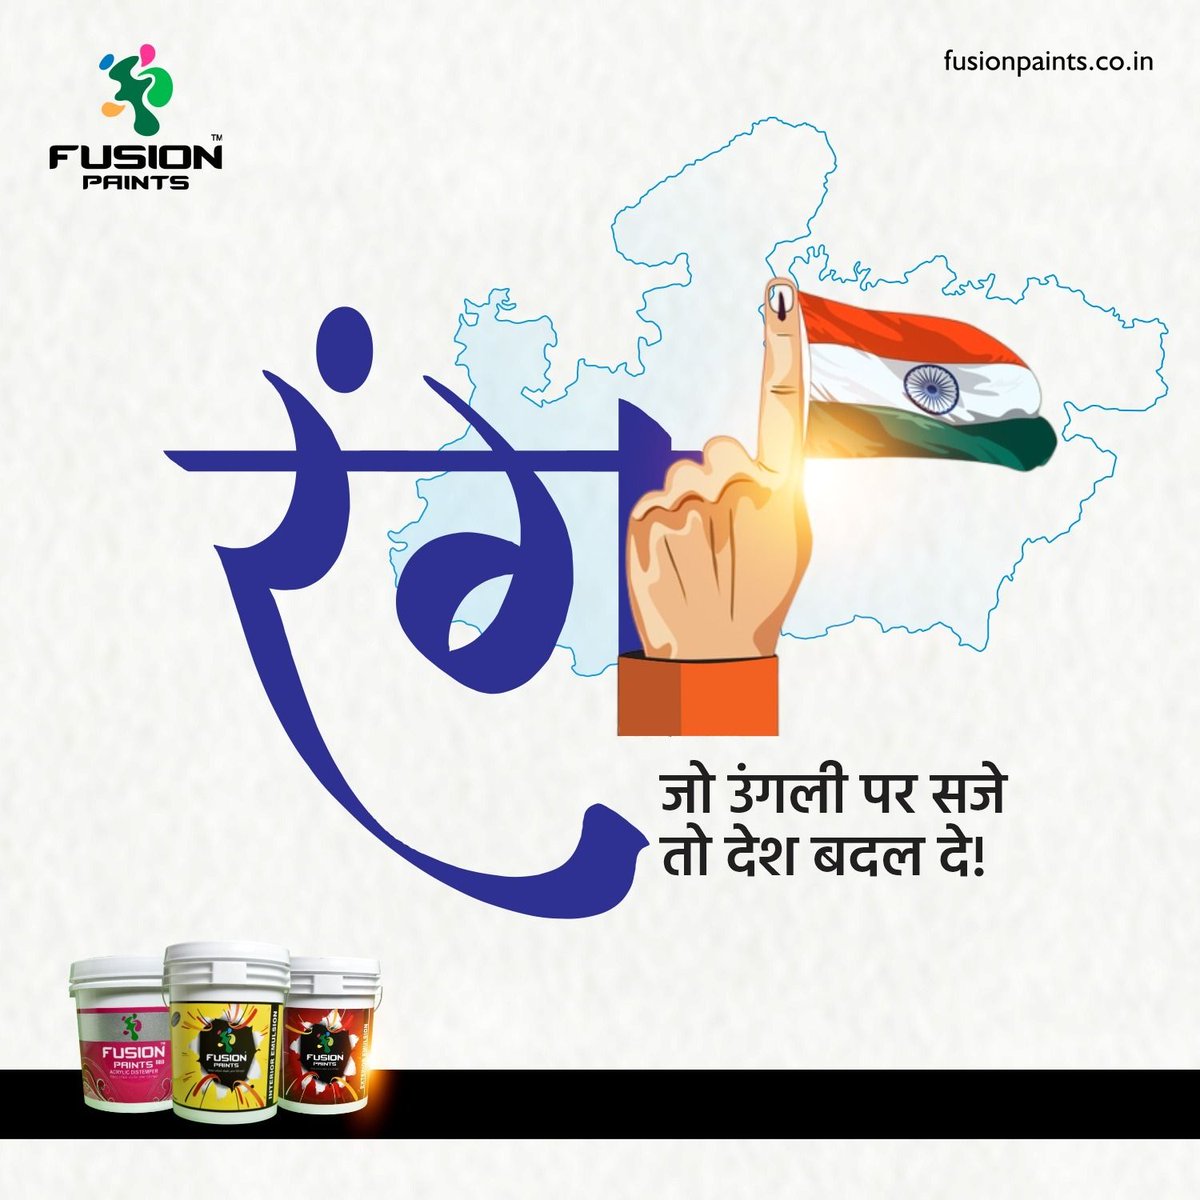 Paint the colour of change.

#fusionpaints #fusion #electionday #mpelection #madhyapradeshelection #constitutionright #vote #castyourvote #wallpaints #texturepaints #texturepainting #paintingideas #diwalipreparations #diwalipainting #housepainting #painting #interiorpainting